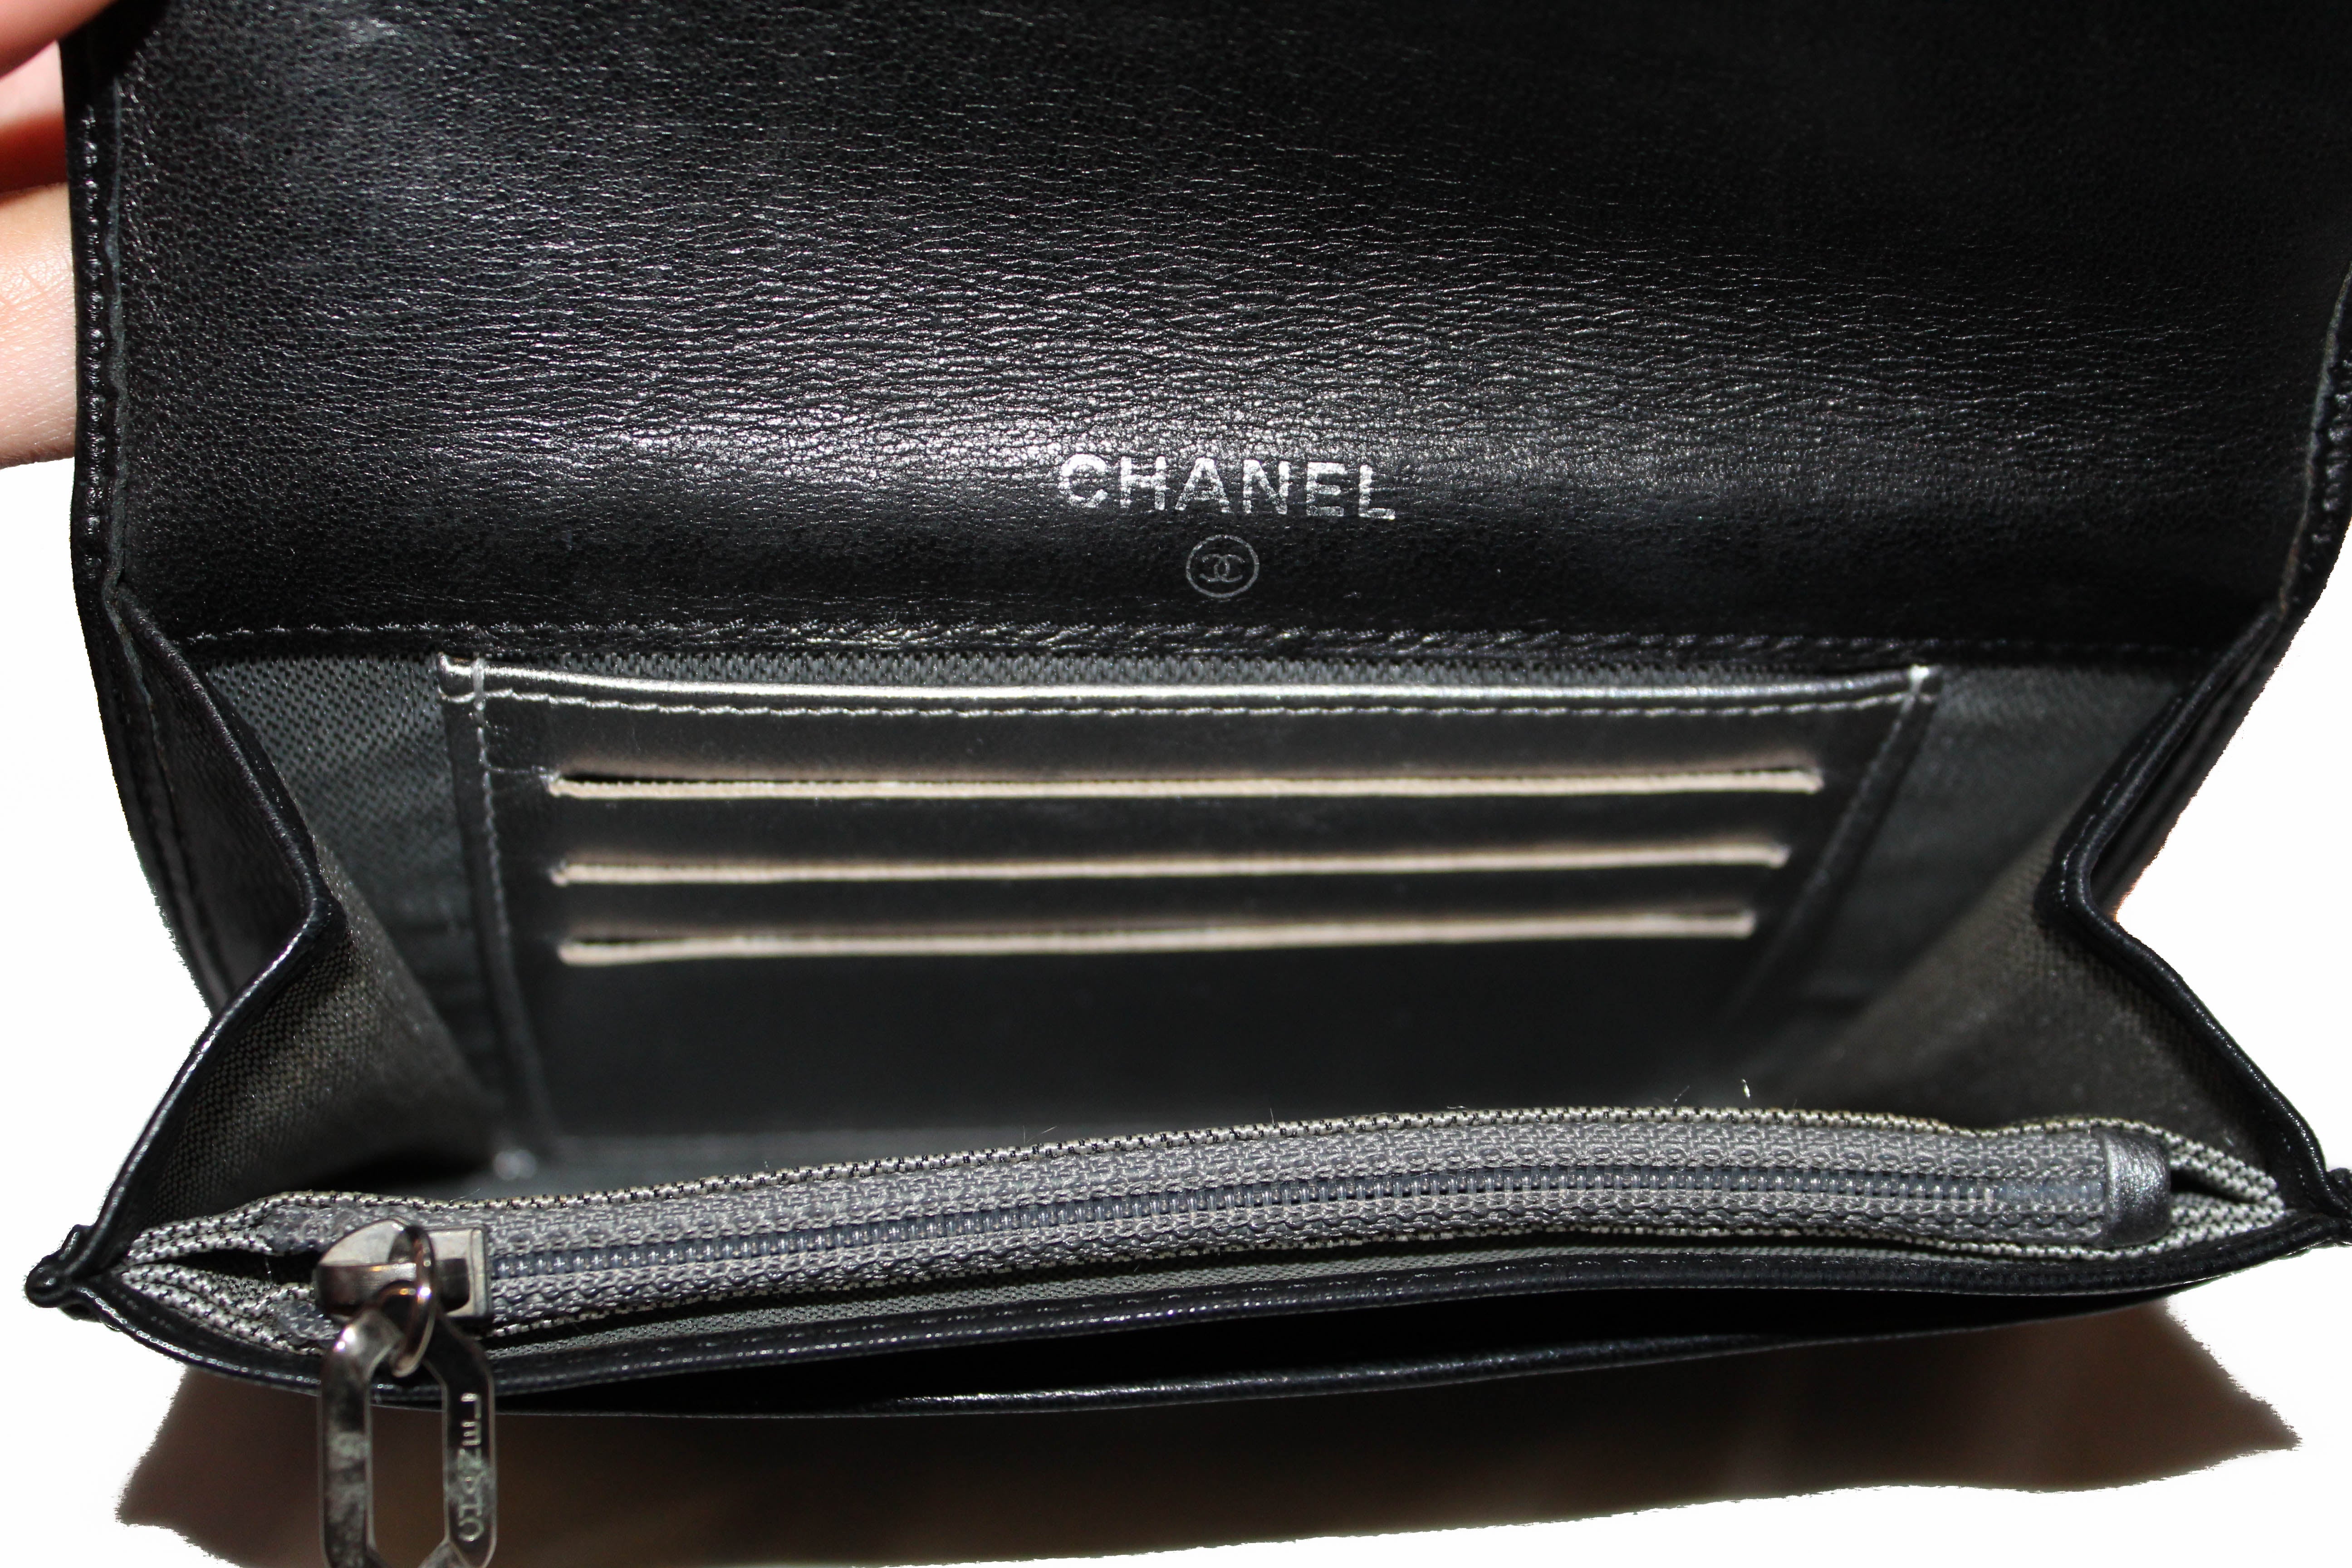 Authentic Chanel Black Lambskin Leather Compact Wallet